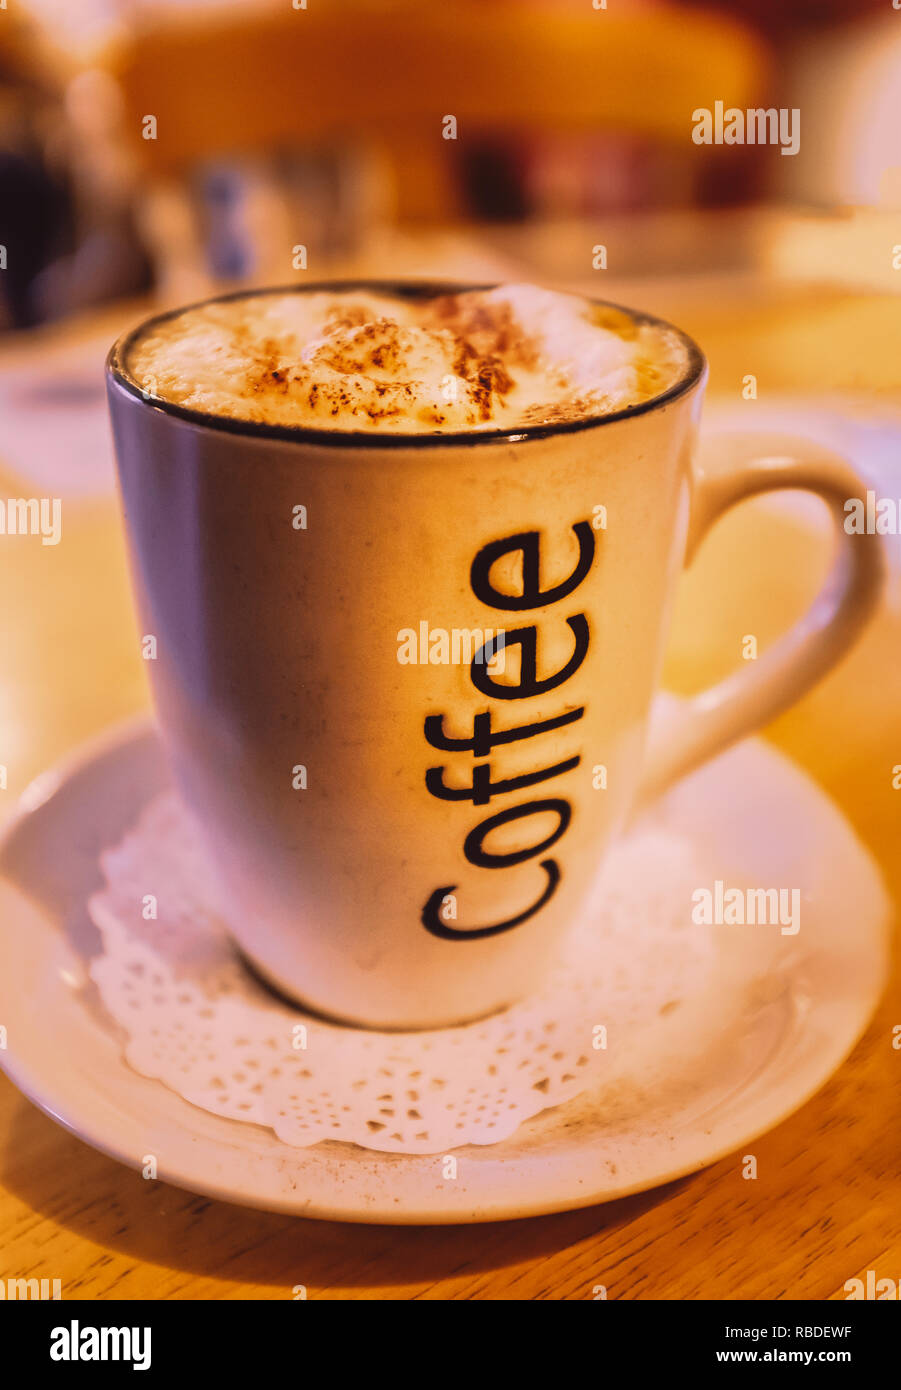 Mug of cappuccino coffee with the word coffee written on the side. On a saucer with a paper lace doily on a round wooden table with a wood chair with  Stock Photo